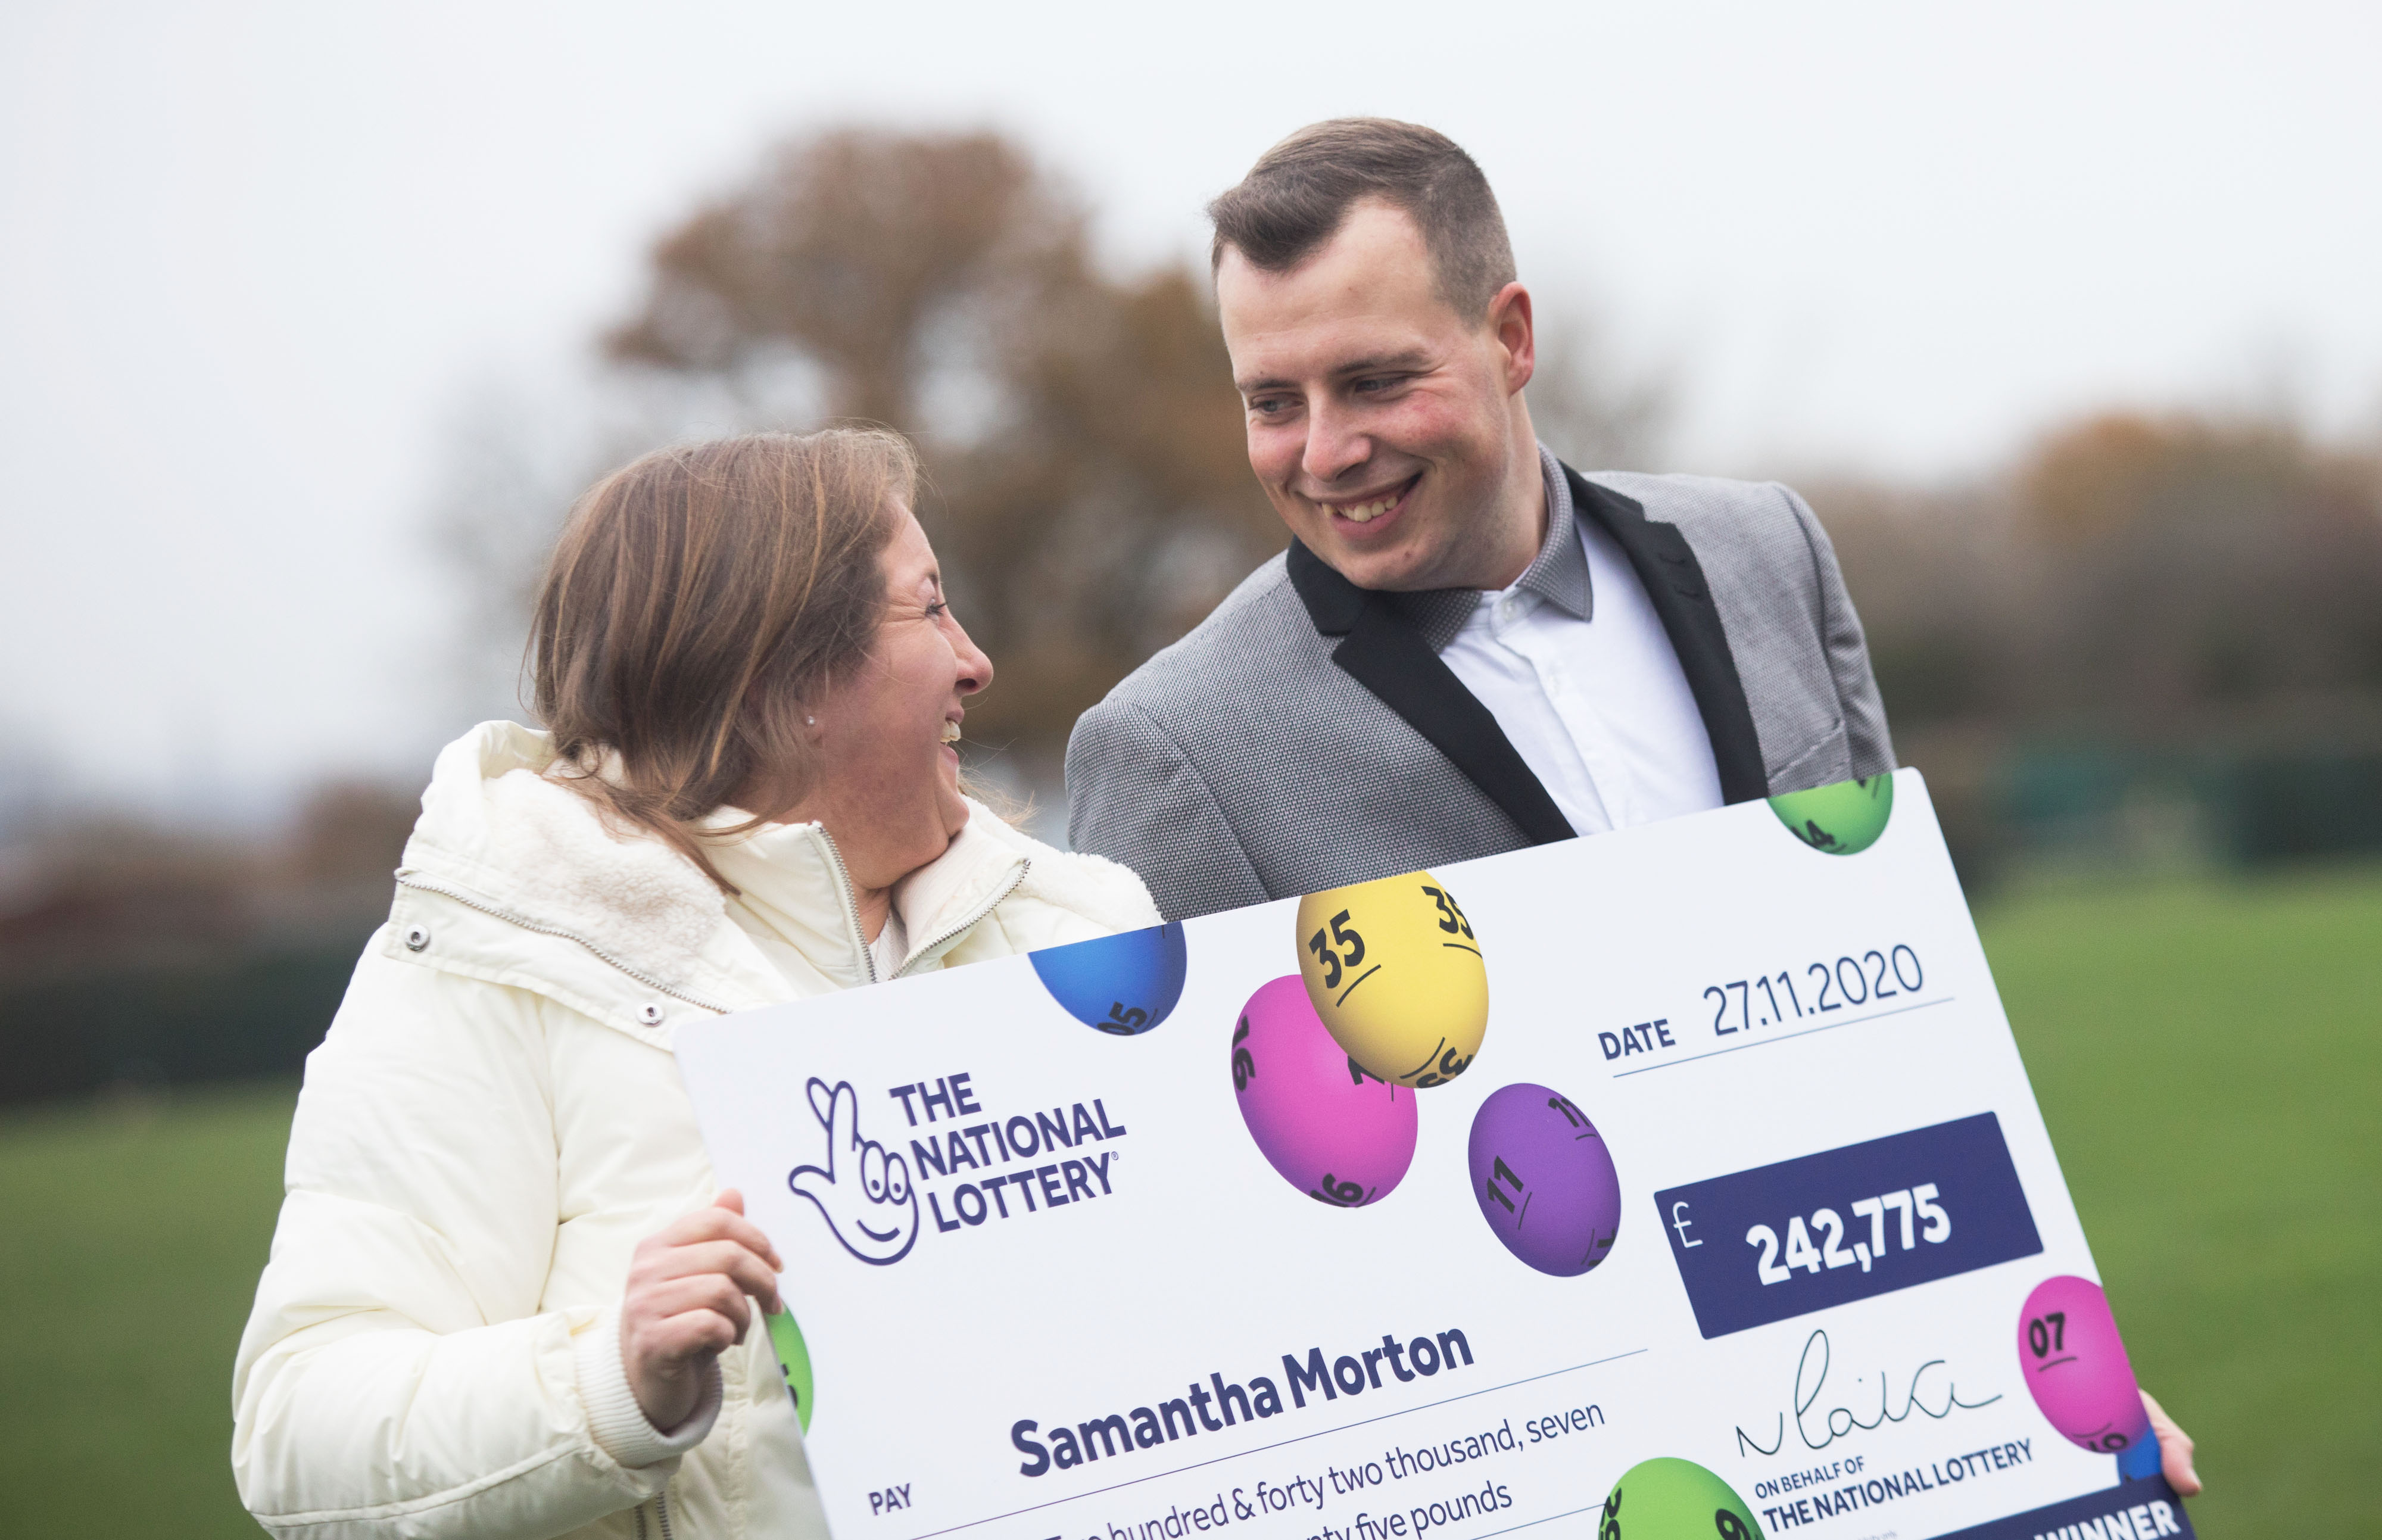 Samantha Morton, 36, who won £242,775.50 with a EuroMillions Lucky Dip ticket, celebrates with her boyfriend Barry Lingard, 26. (National Lottery/ PA)